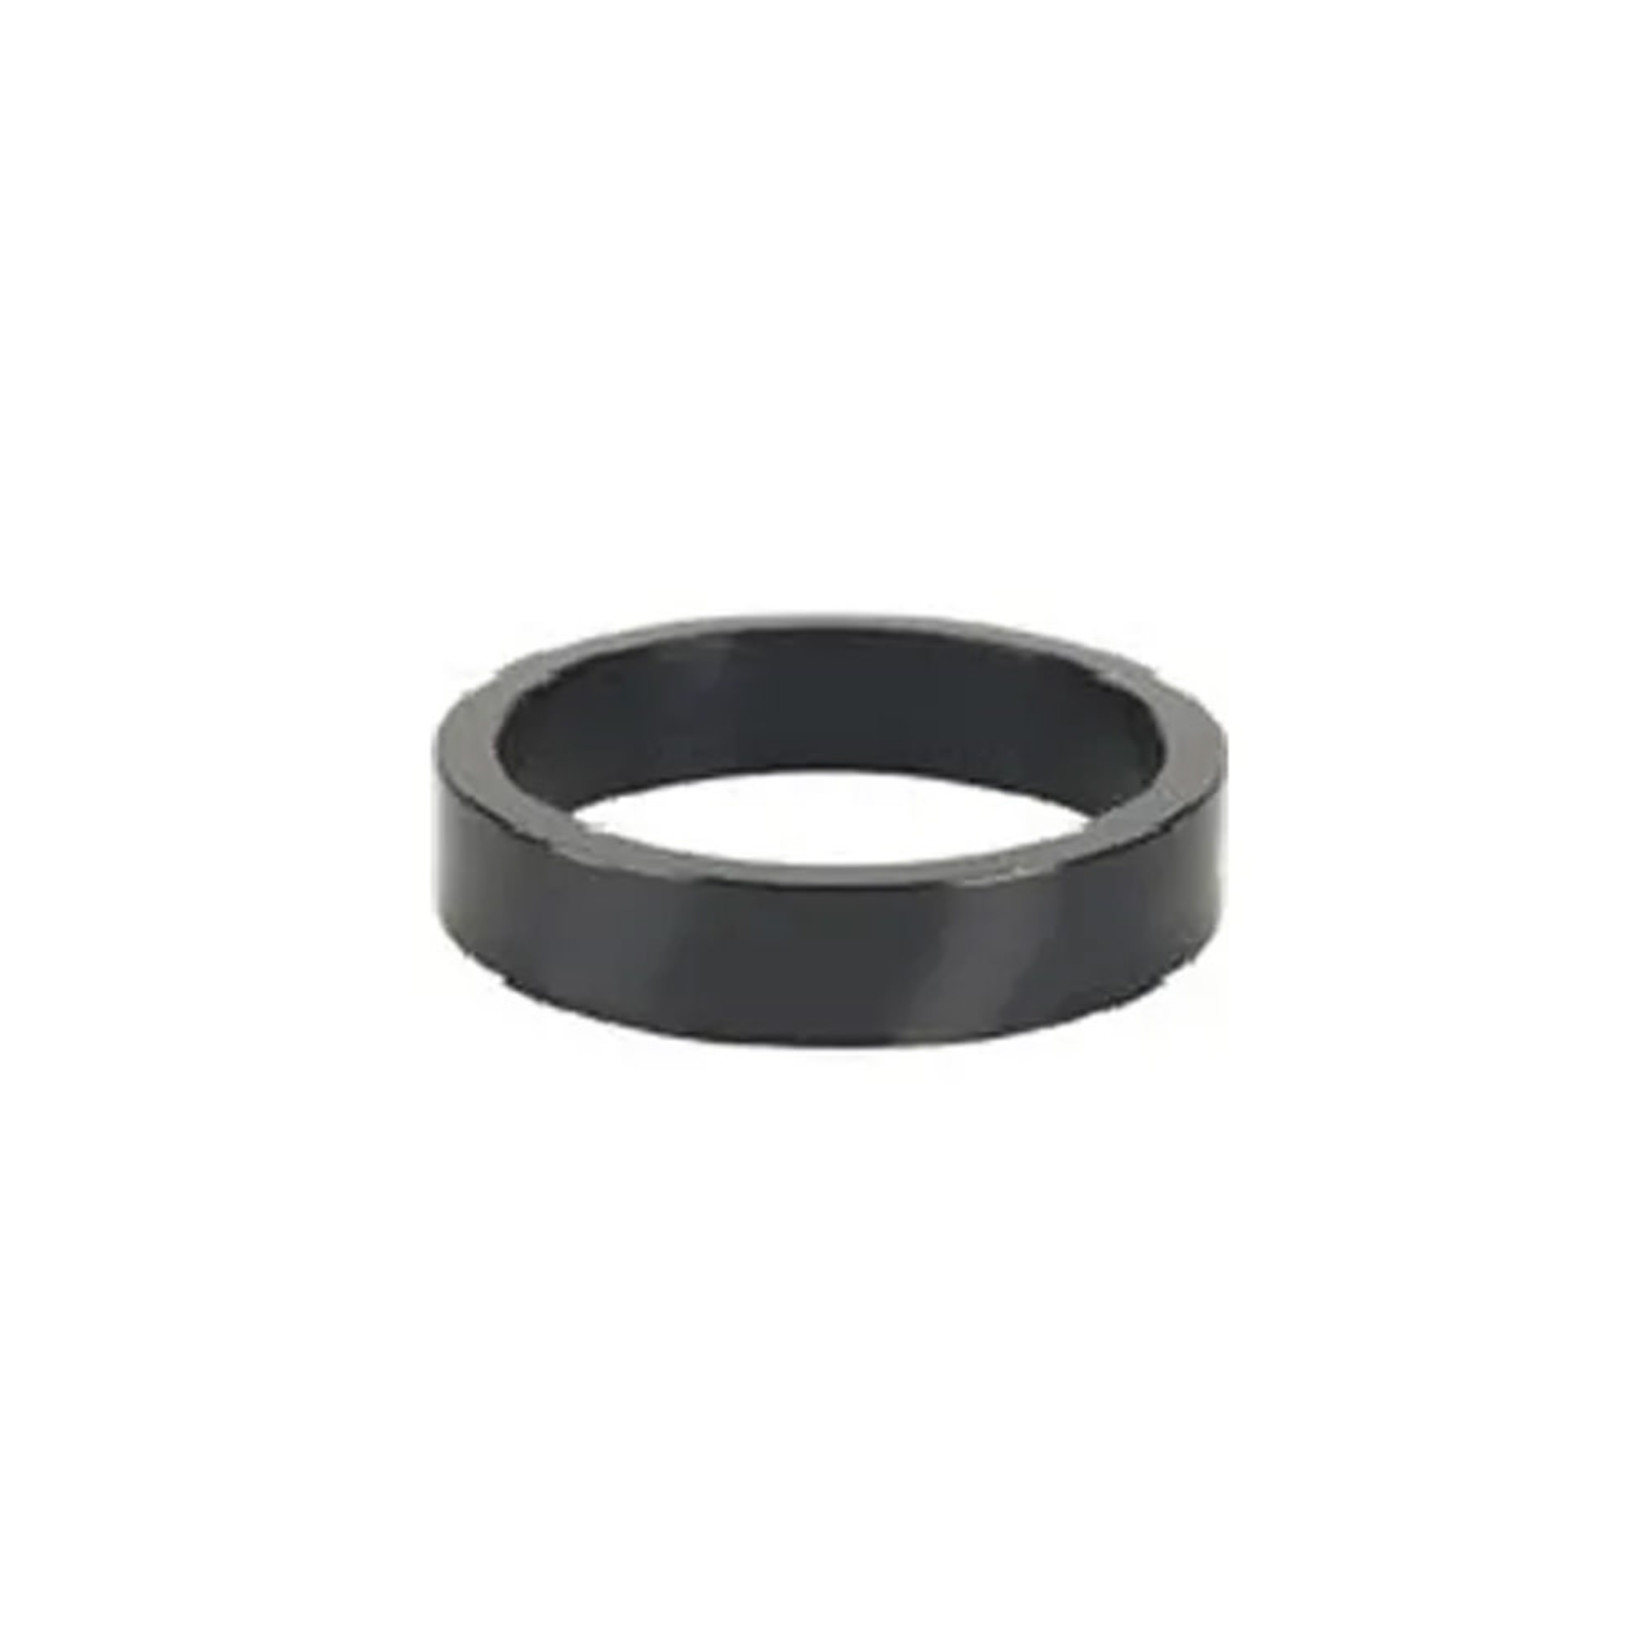 Incomex Trading Pty Ltd BPW Spacer Alloy 1 1/8 Headset 5mm - Black